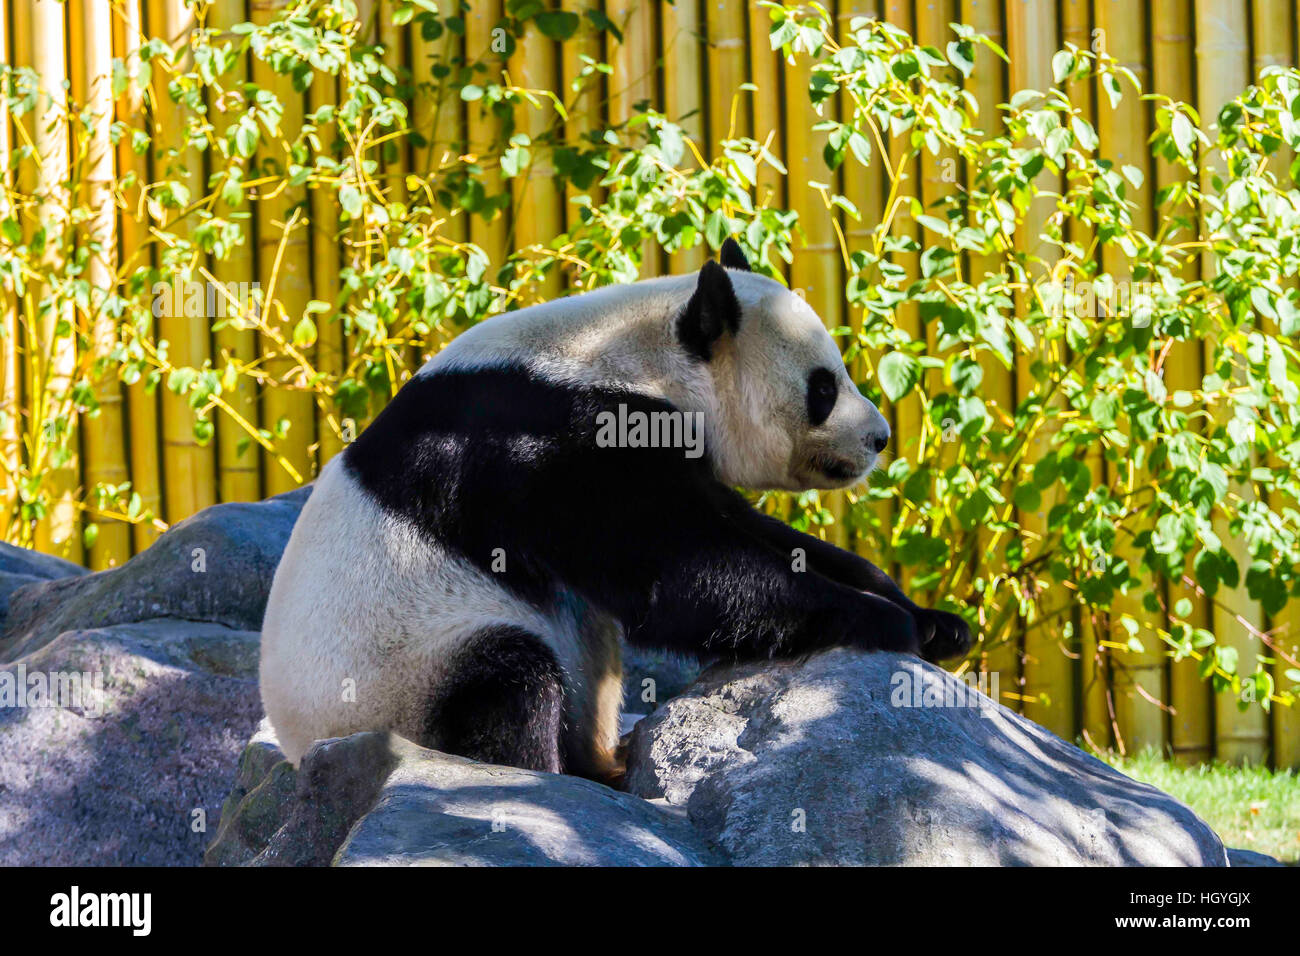 A Giant Panda at the Zoo Stock Photo